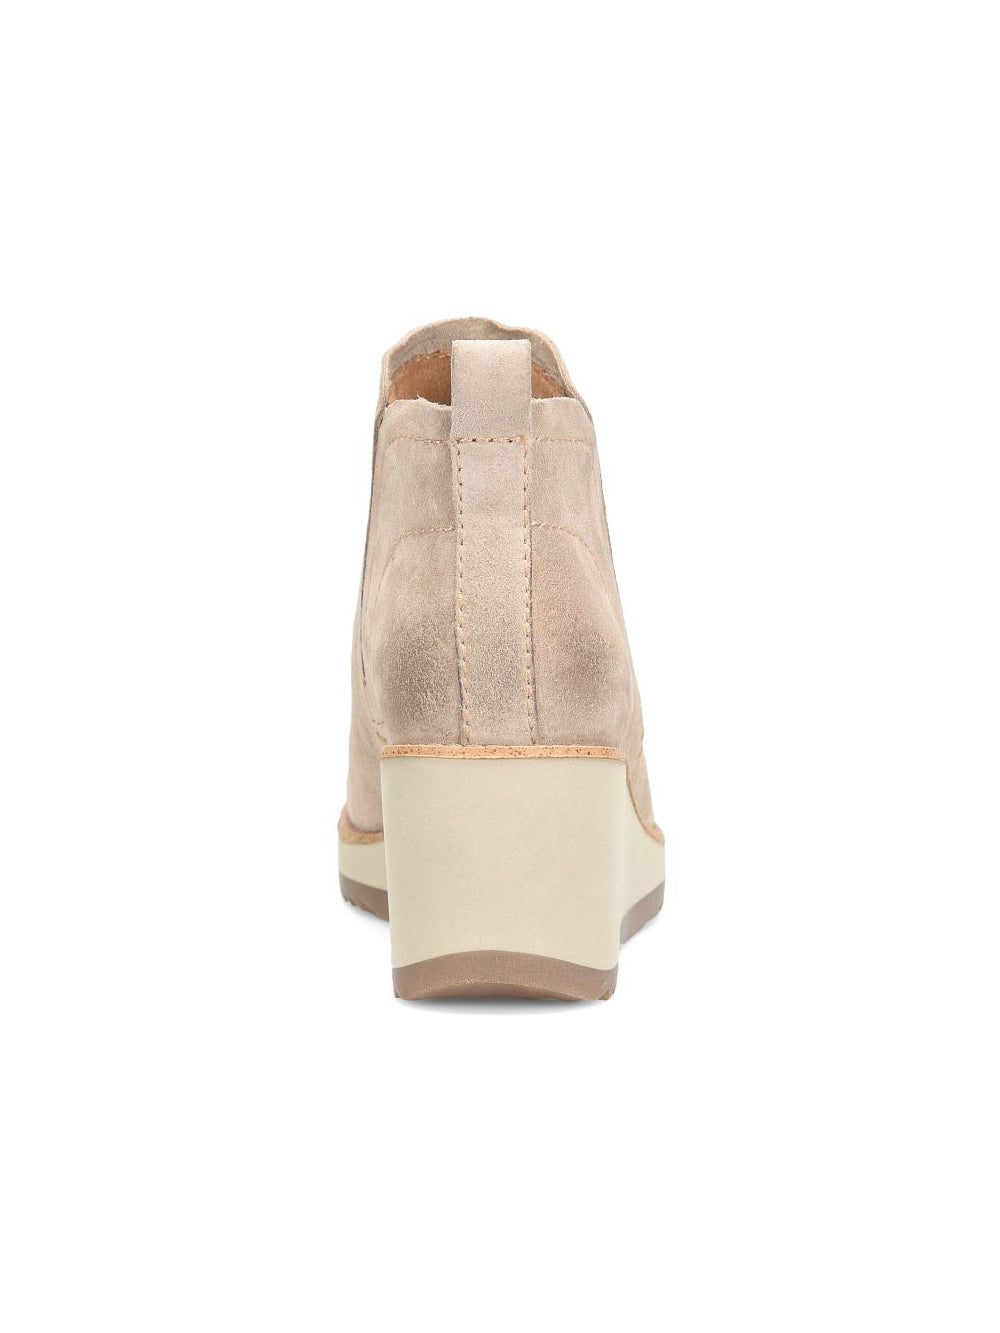 sofft shoes emeree wedge chelsea ankle boot in baywater suede tan